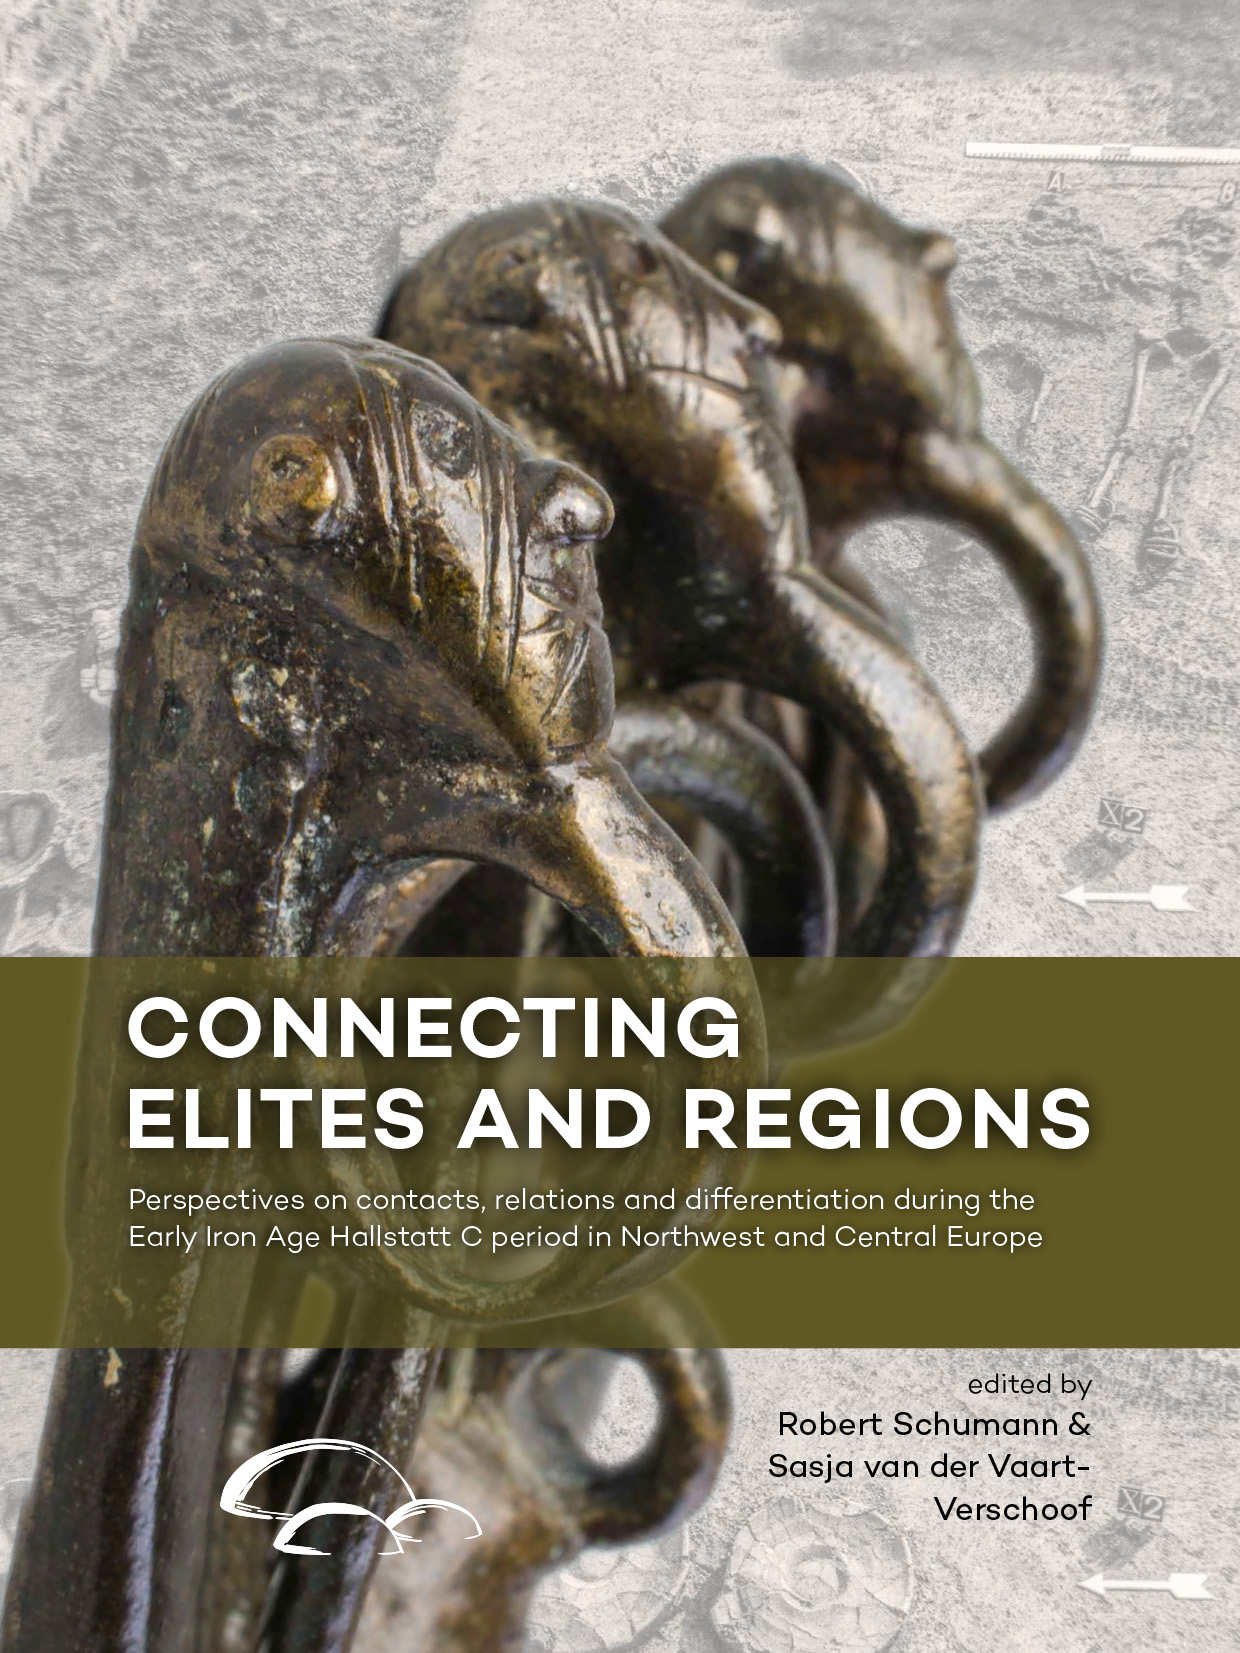 Connecting Elites and Regions. Perspectives on contacts, relations and differentiation during the Early Iron Age Hallstatt C period in Northwest and Central Europe, 2017, 386 p.